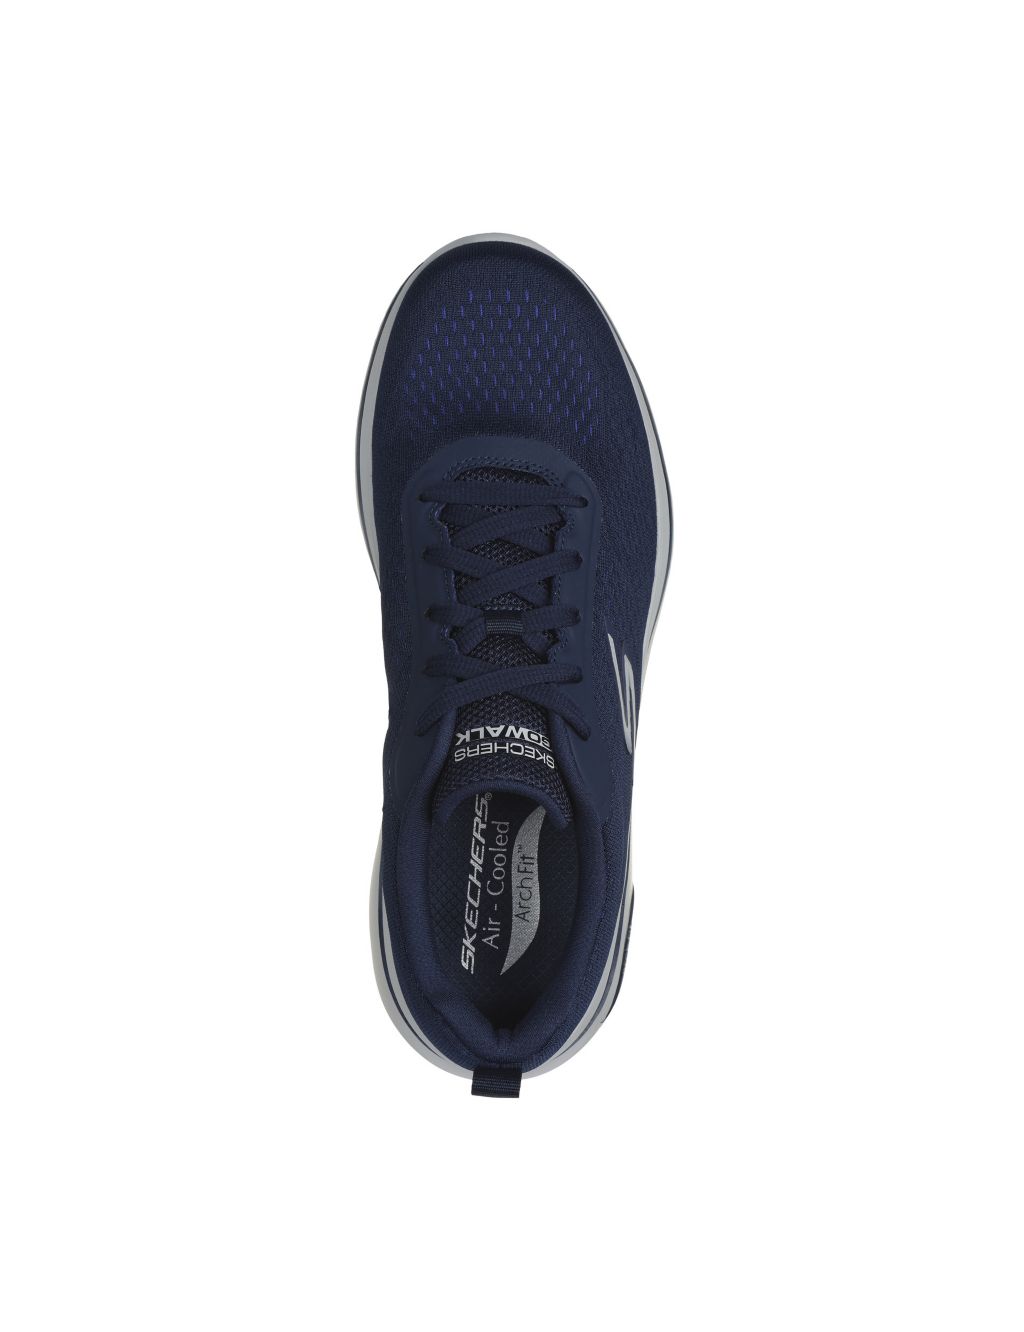 GOwalk Arch Fit 2.0 Lace Up Trainers 4 of 5